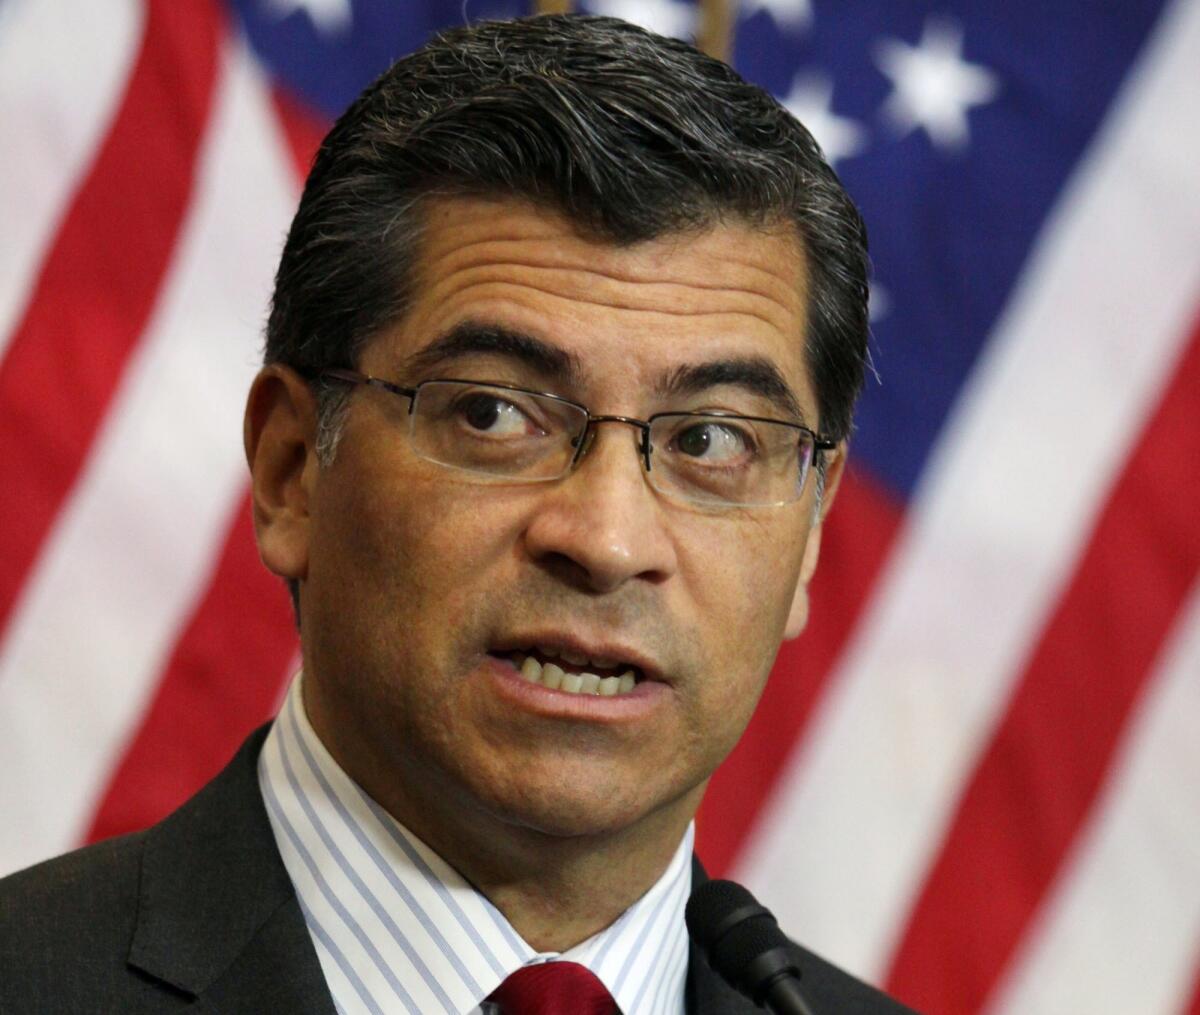 Most prominent among the undecided lawmakers is California Rep. Xavier Becerra (D-Los Angeles), chairman of the House Democratic caucus.